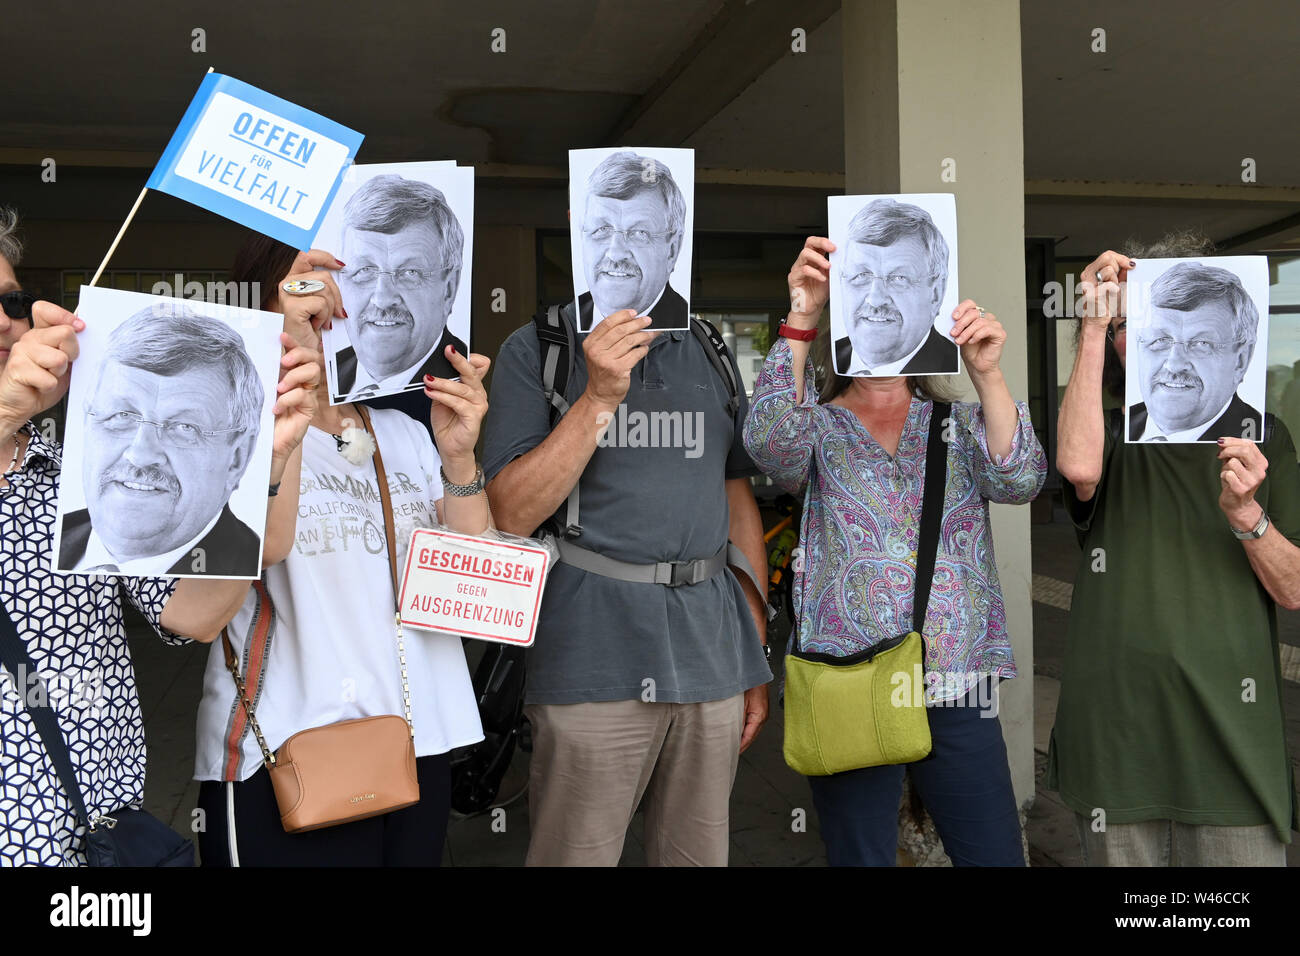 Kassel, Germany. 20th July, 2019. Demonstrators against the march of the smallest party 'Die Rechte' hold portraits of the shot Walter Lübck in front of their faces. The party had called for a demonstration in Kassel against media prejudgement in connection with the Lübcke case. A massive police presence is to prevent possible riots between the two camps. Credit: Uwe Zucchi/dpa/Alamy Live News Stock Photo